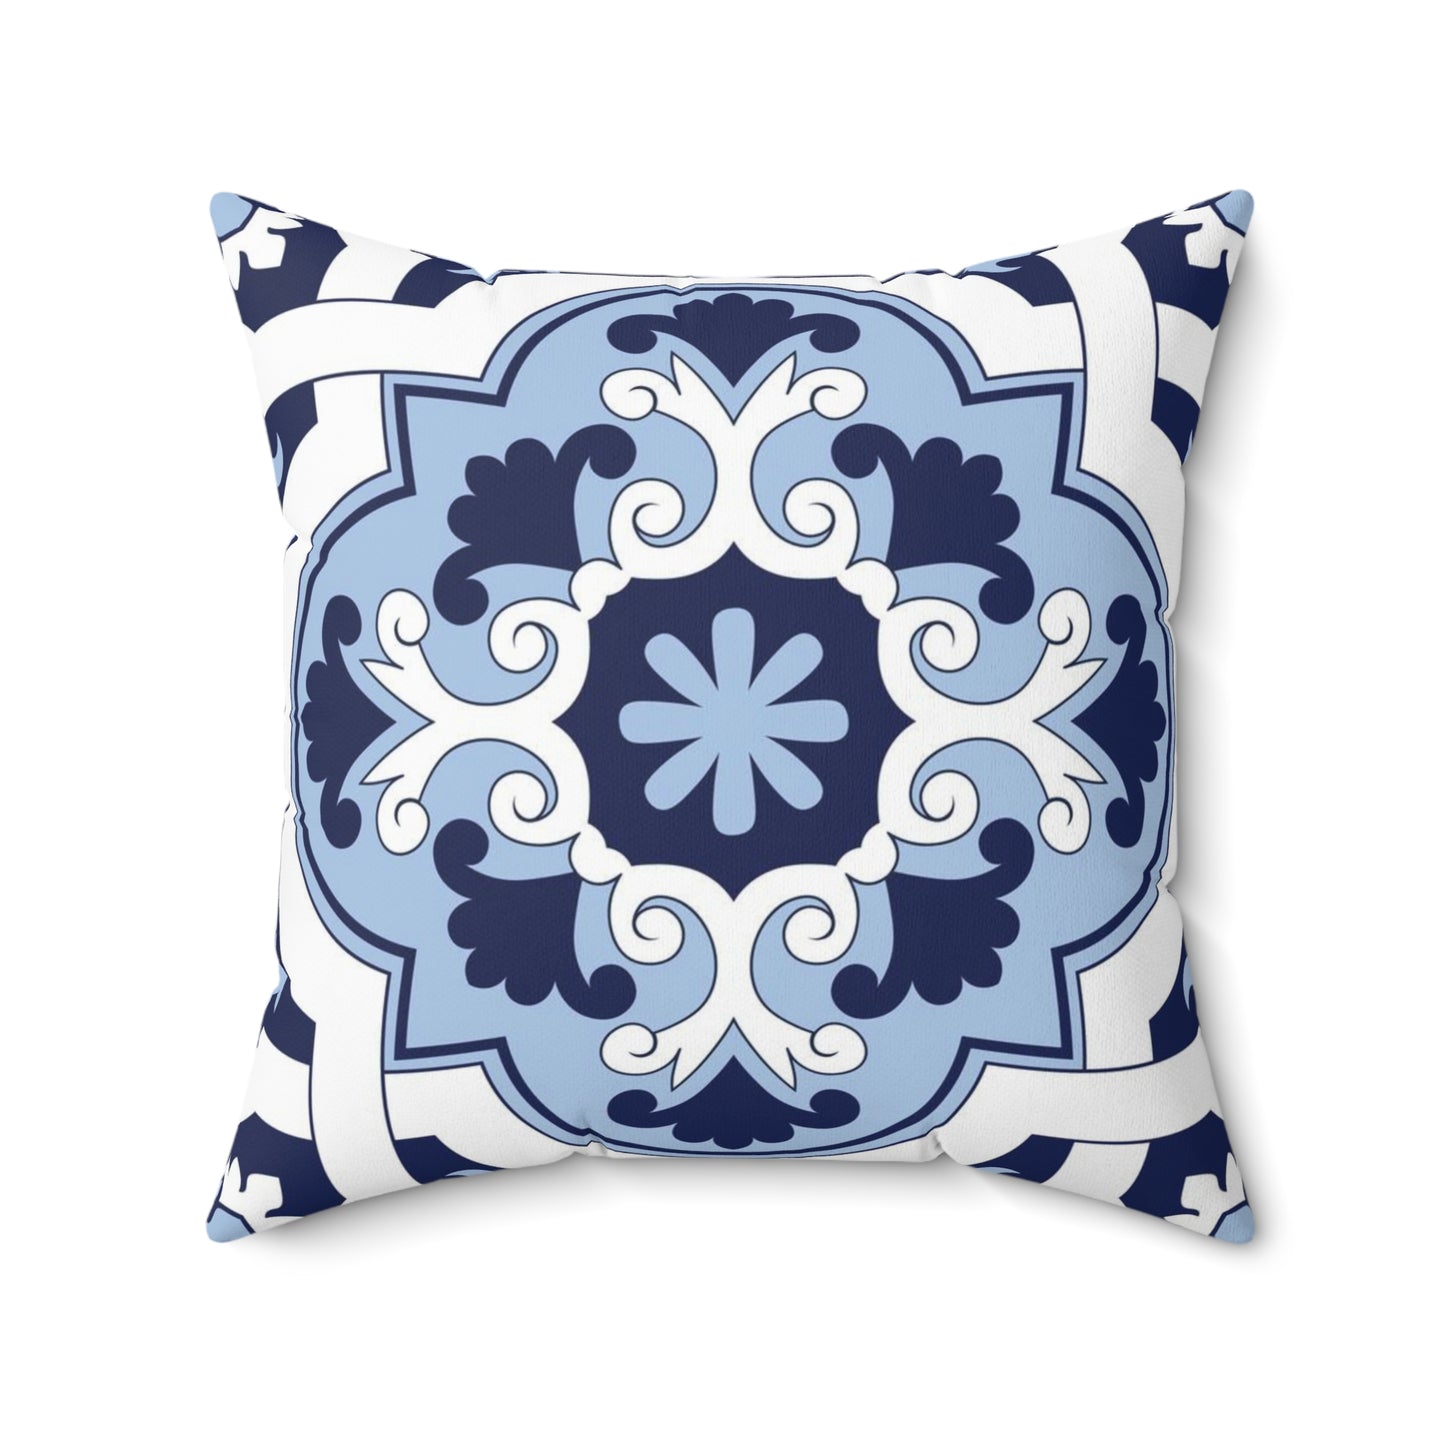 Greek Islands Shades of Blue Decorative Pillow Cover